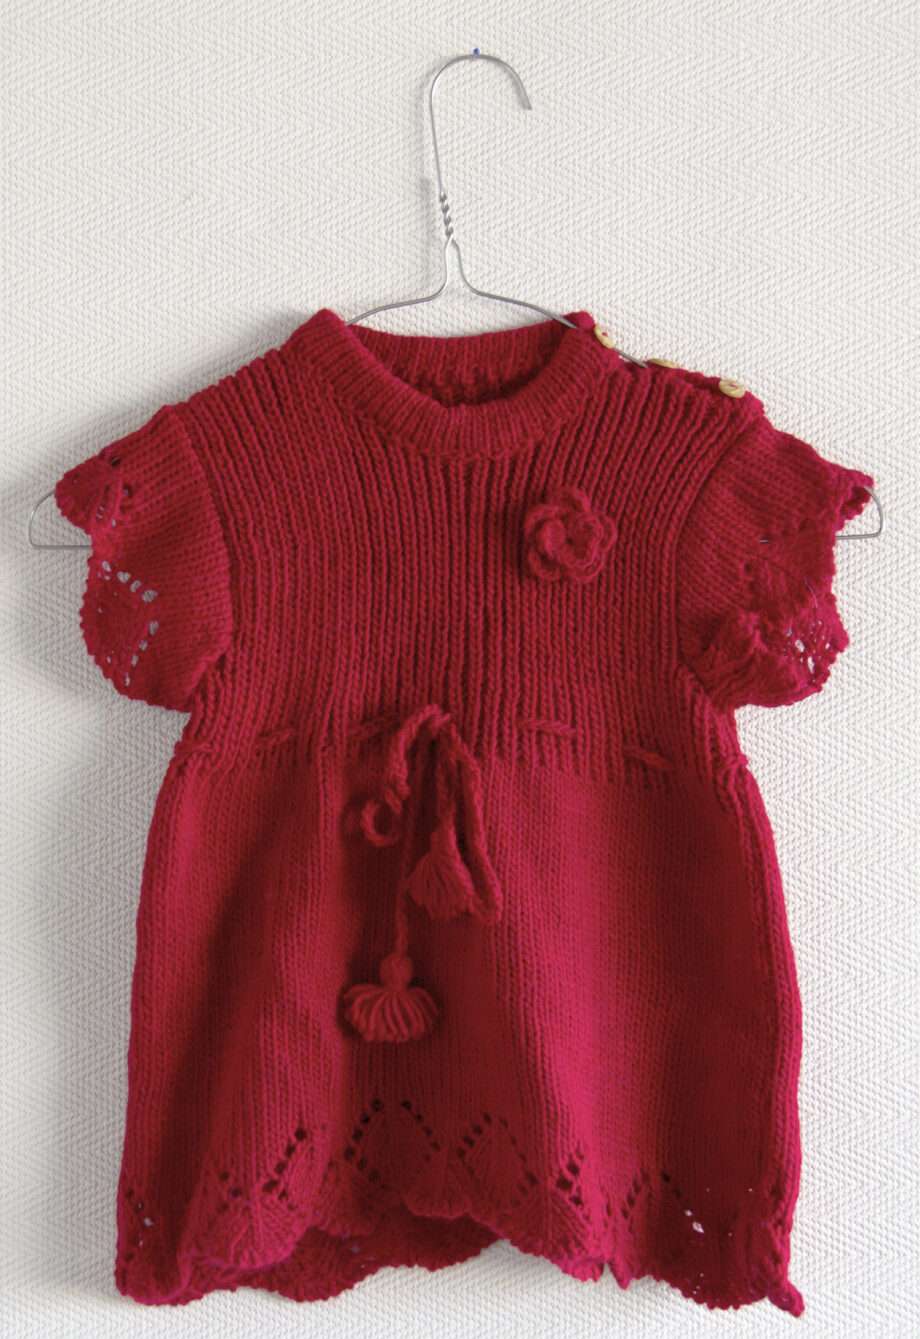 knitted woolen dress red rose 1 year